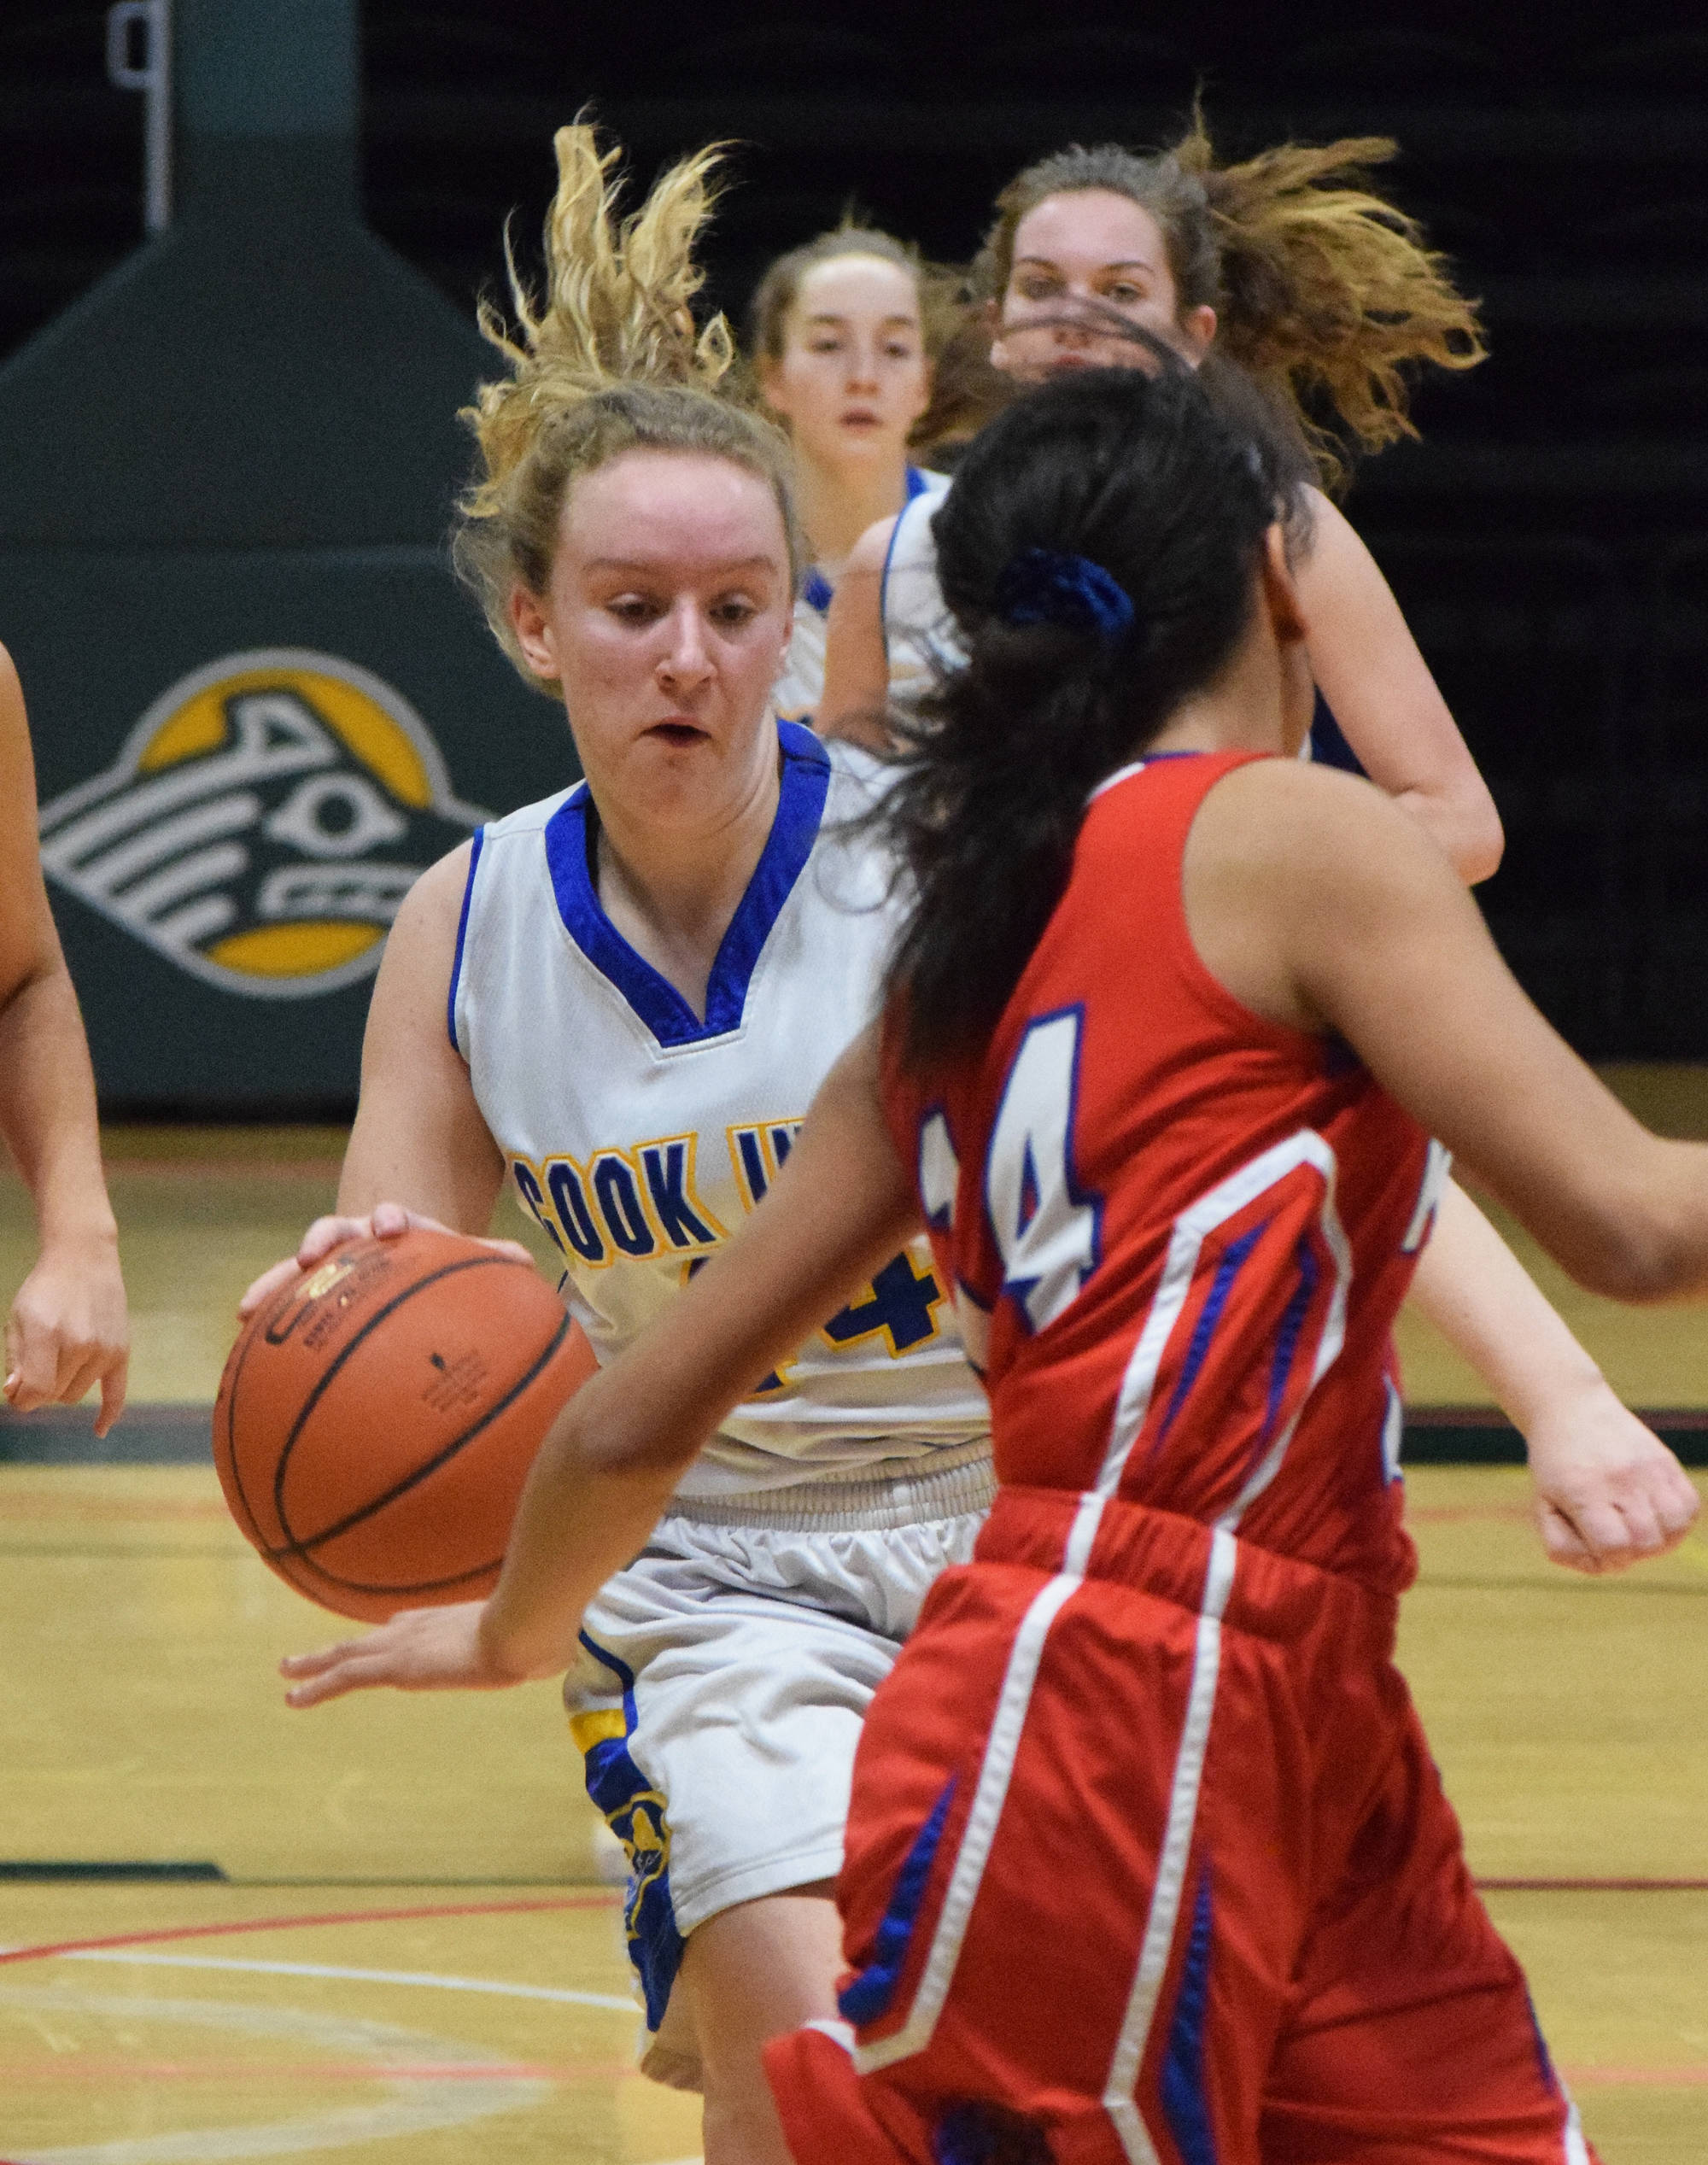 Cook Inlet Academy’s Adara Warren (left) races down the court Wednesday in a first-round contest against Kake at the Class 1A girls basketball state tournament at the Alaska Airlines Center in Anchorage. (Photo by Joey Klecka/Peninsula Clarion)